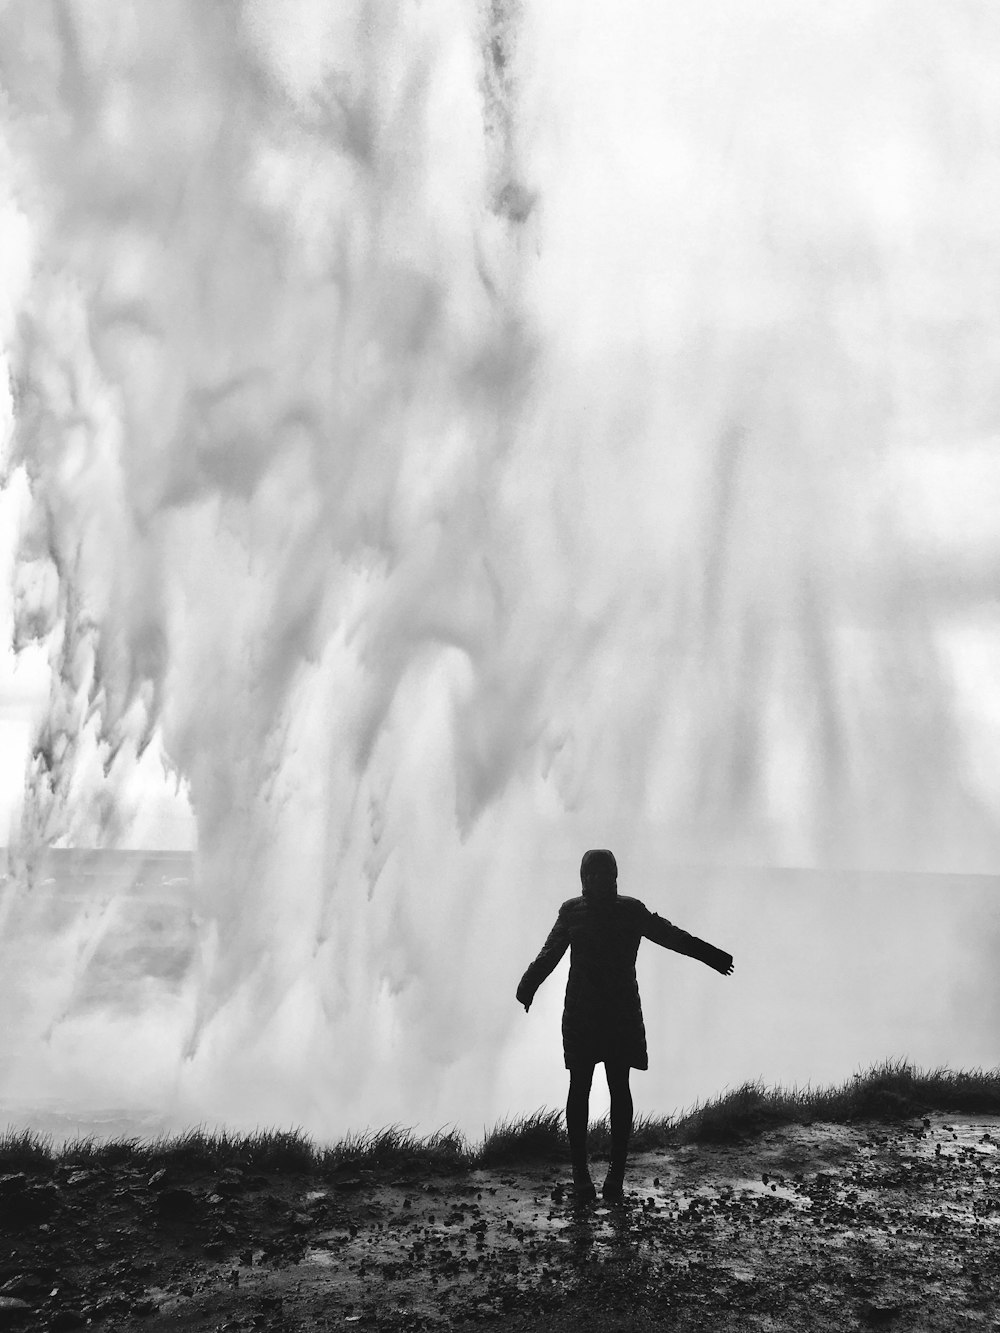 grayscale photography of person standing in front of splashing water waves